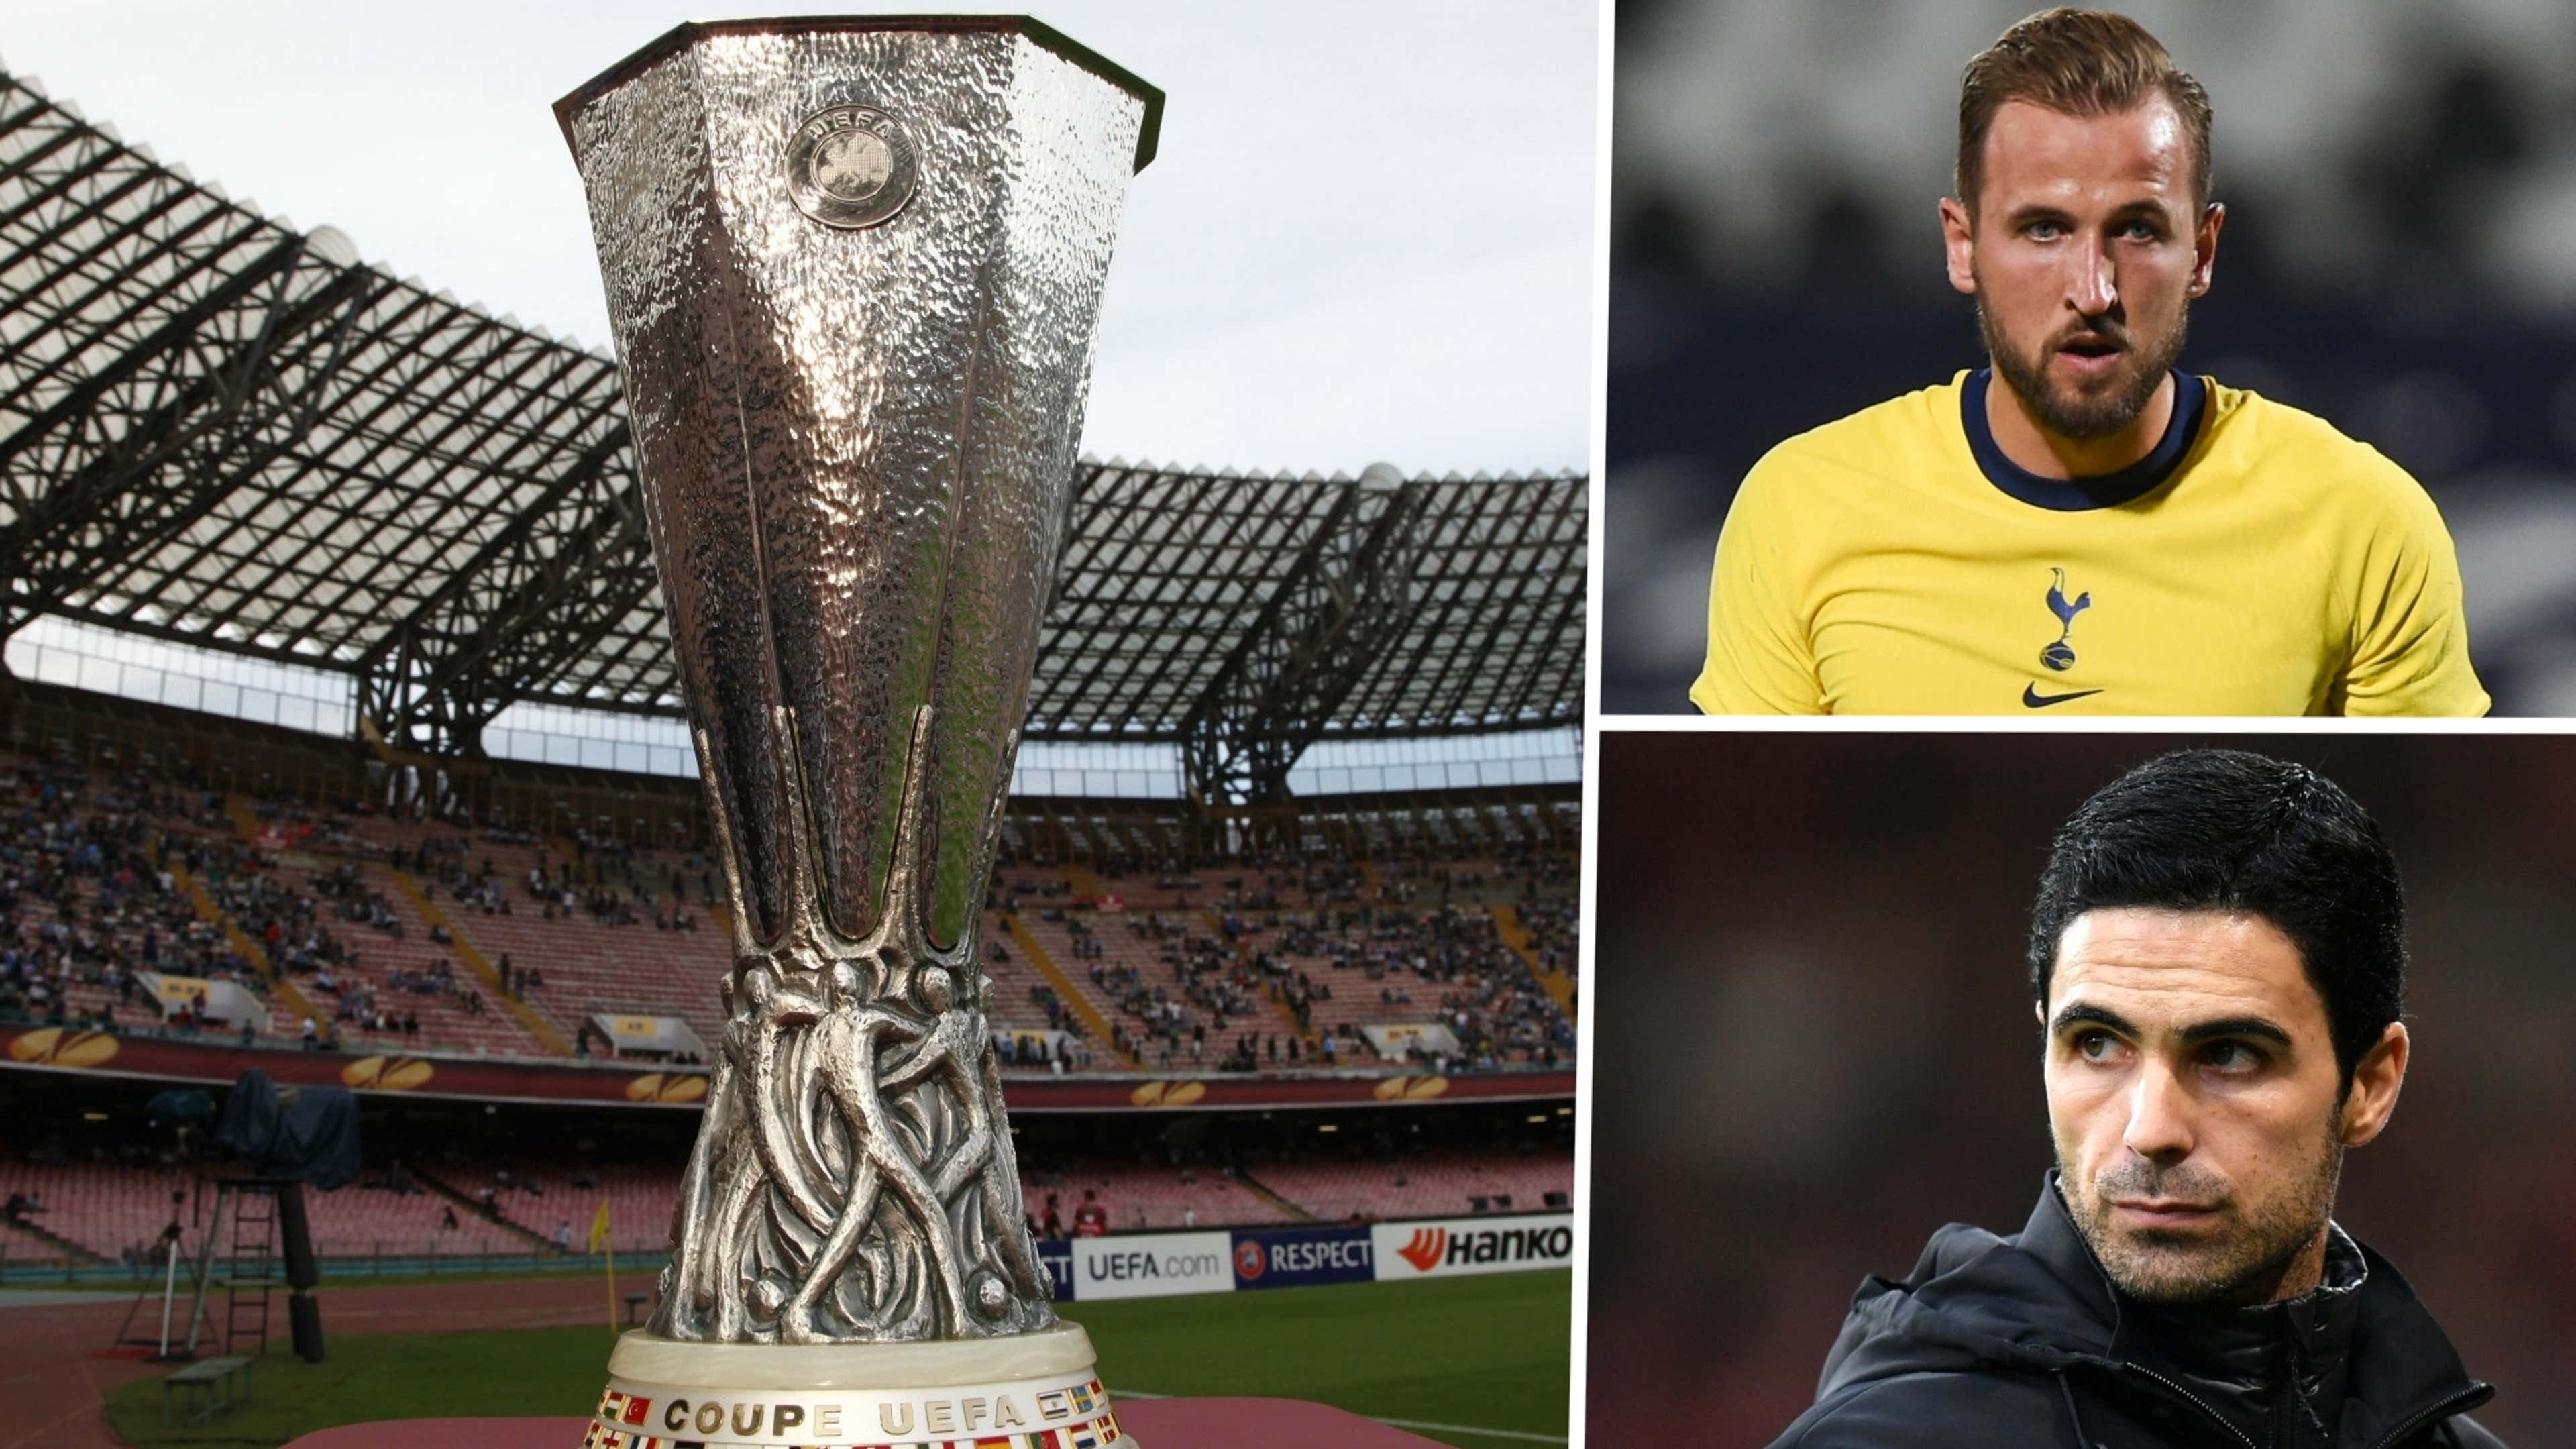 Slavia Prague vs Arsenal in UEFA Europa League quarter-finals, watch live  streaming and telecast in India